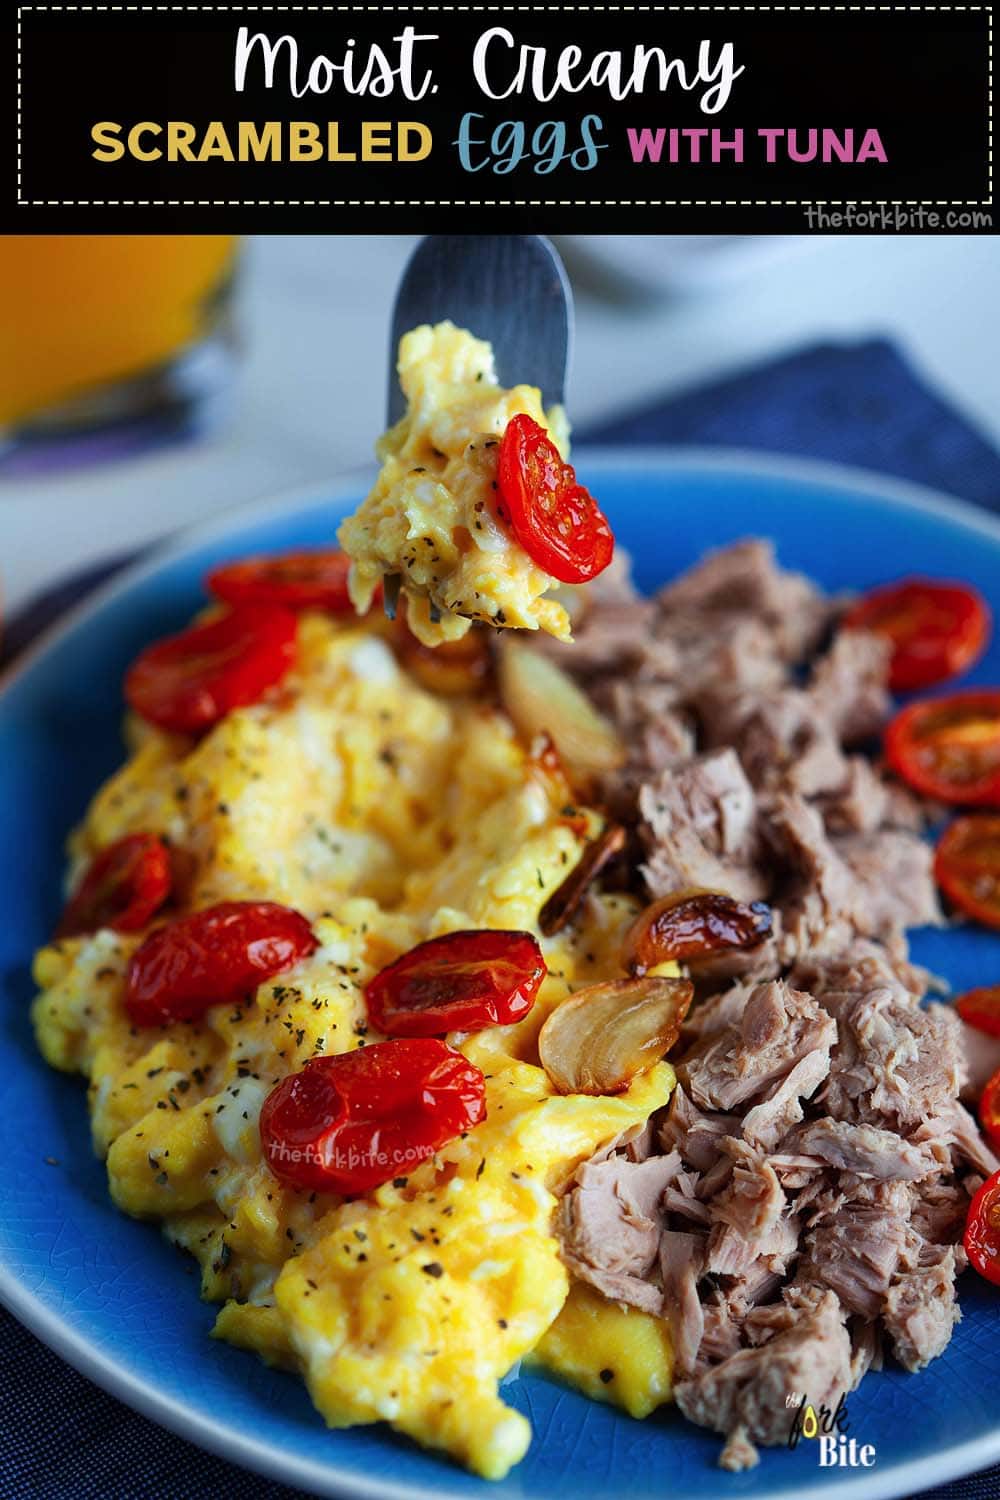 This recipe is dreamy, creamy scrambled eggs with tuna. These are not just soft and velvety; they are the best scrambled eggs on the planet